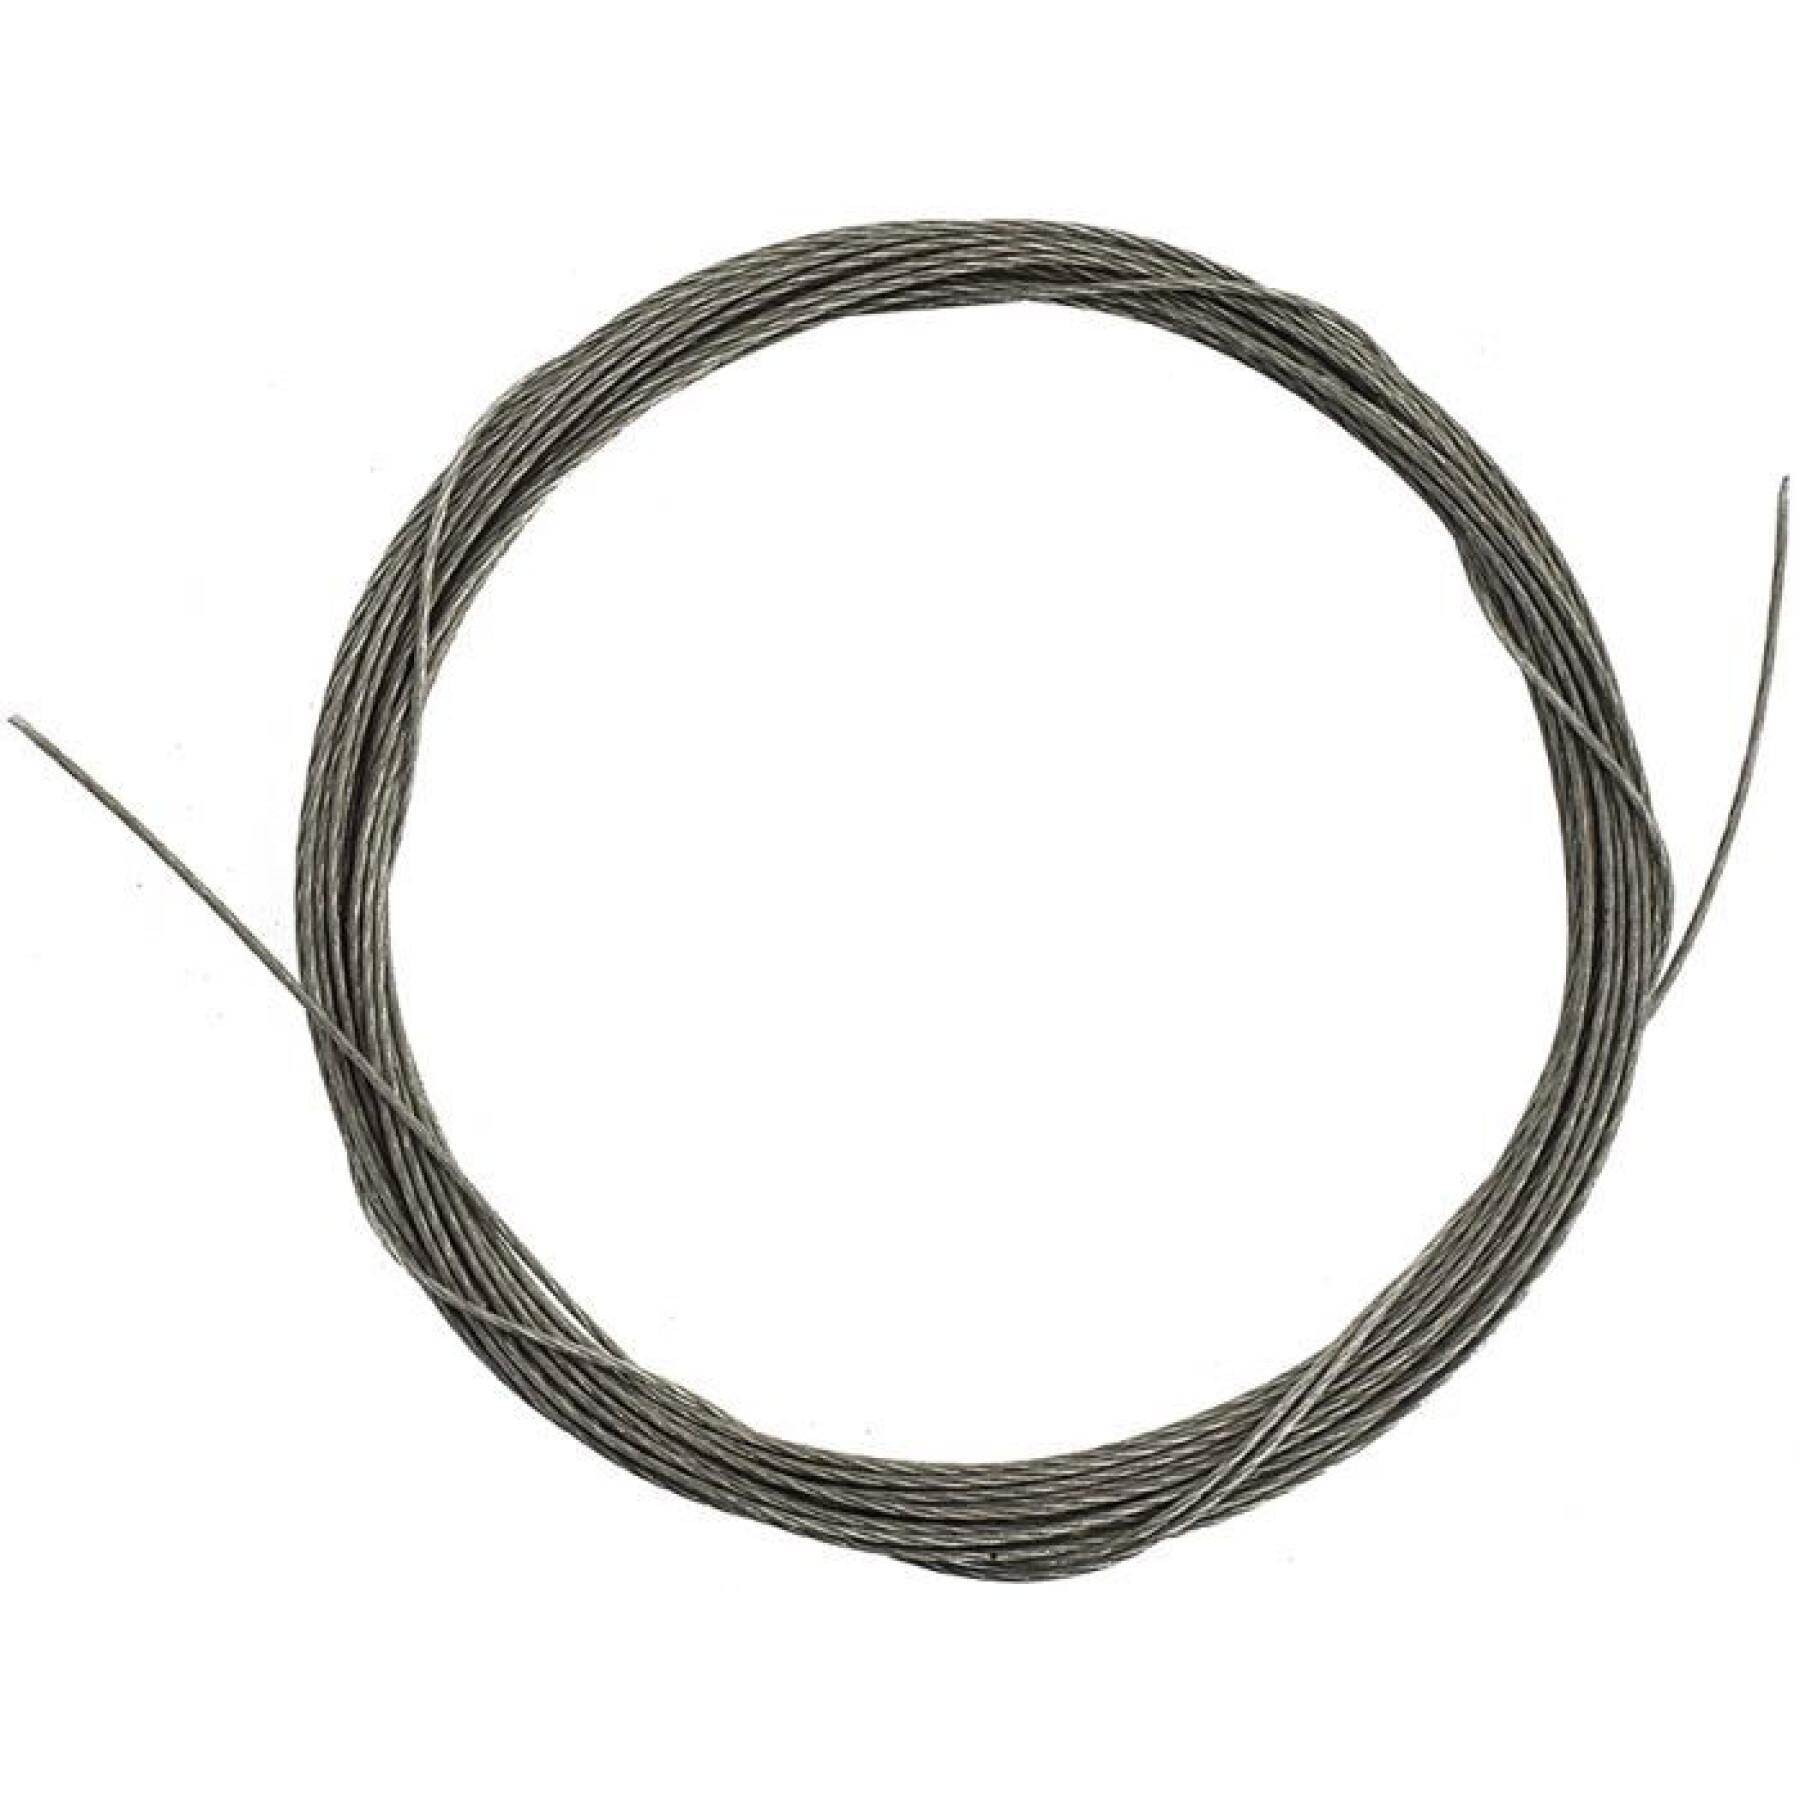 Footer Decoy Wl 70 N Coated Wire 46